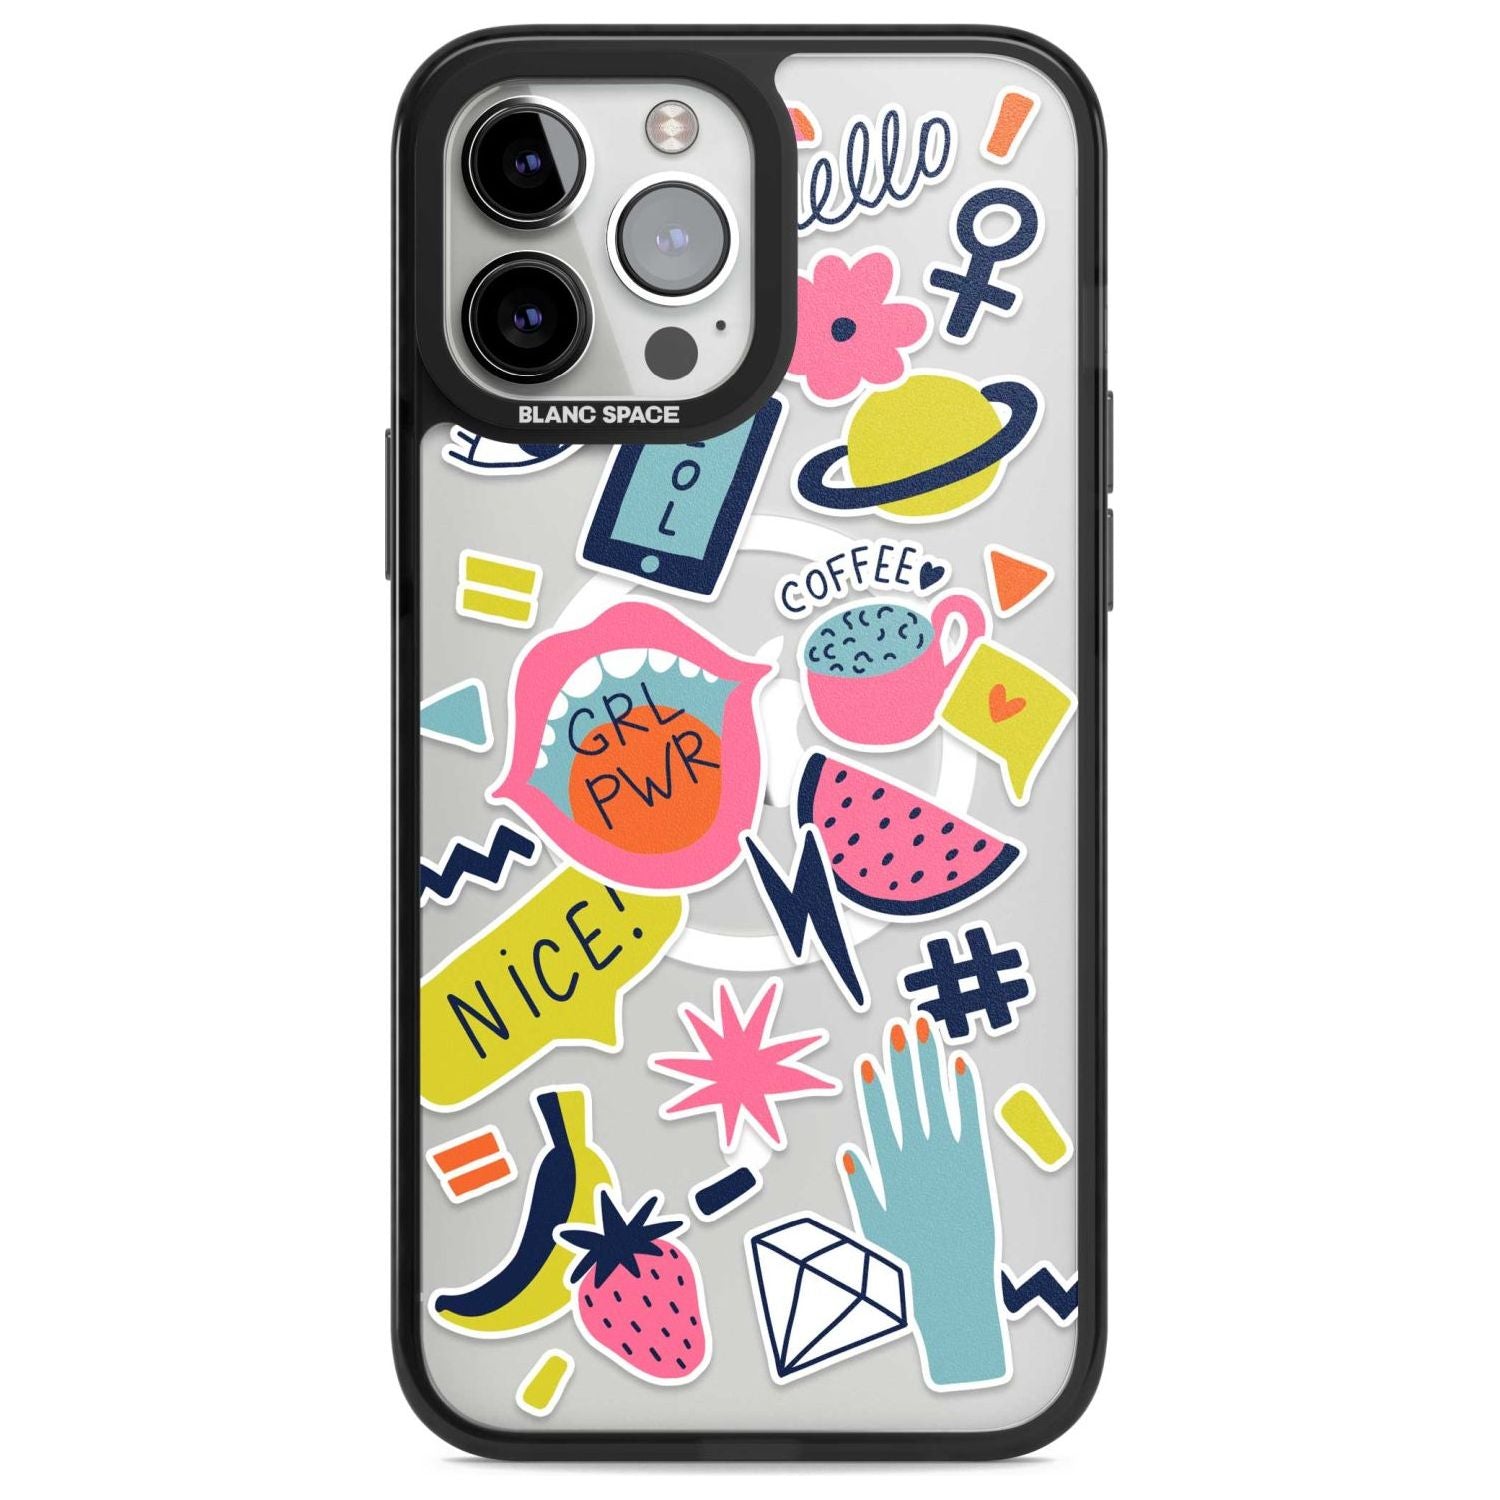 GRL PWR Phone Case iPhone 13 Pro Max / Magsafe Black Impact Case Blanc Space